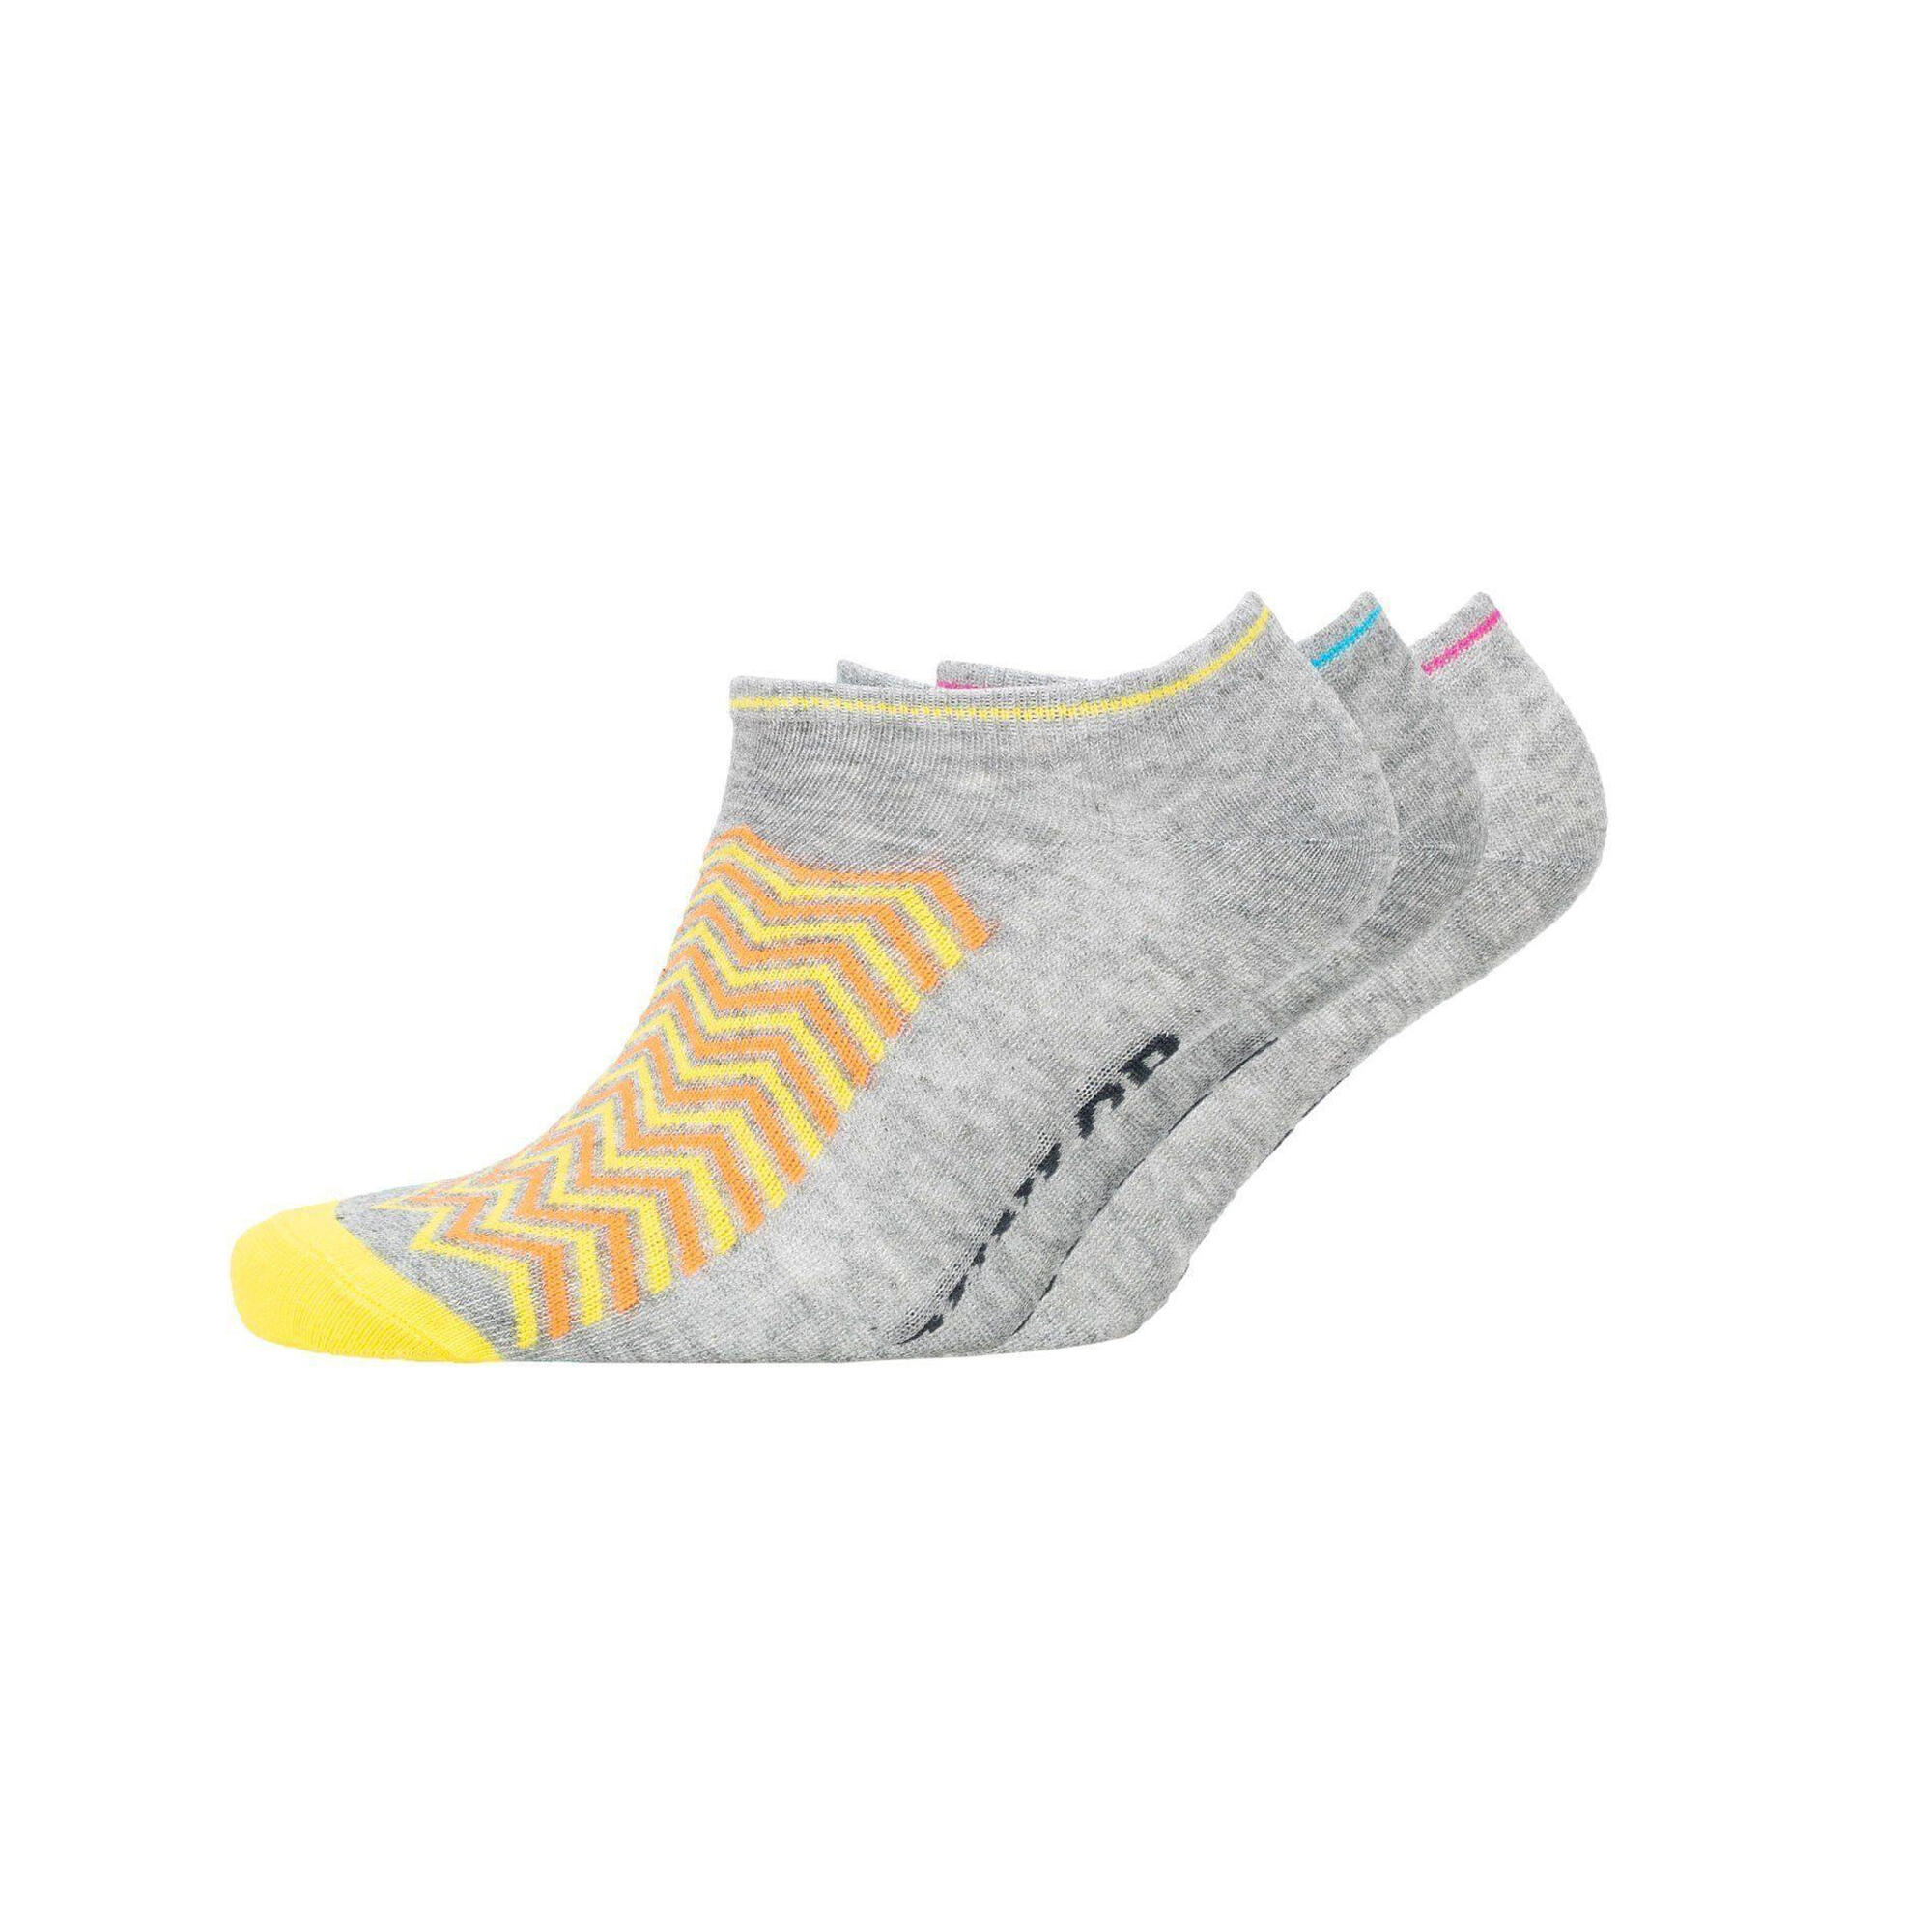 DUNLOP Womens/Ladies Cheveon Trainer Socks (Pack of 3) (Multicoloured)